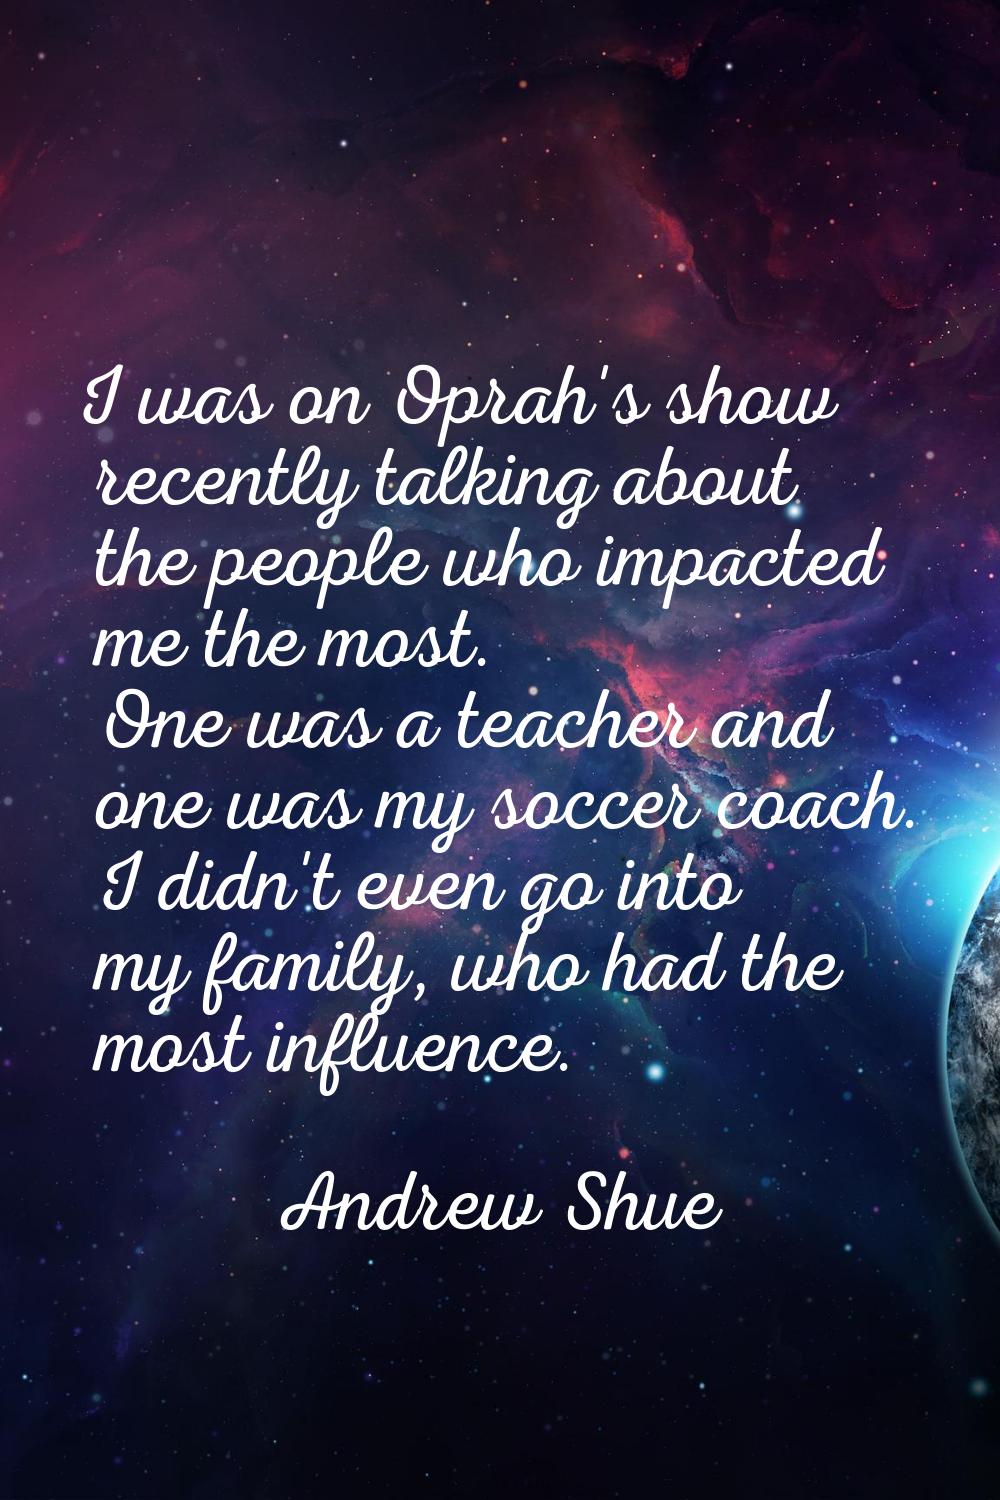 I was on Oprah's show recently talking about the people who impacted me the most. One was a teacher